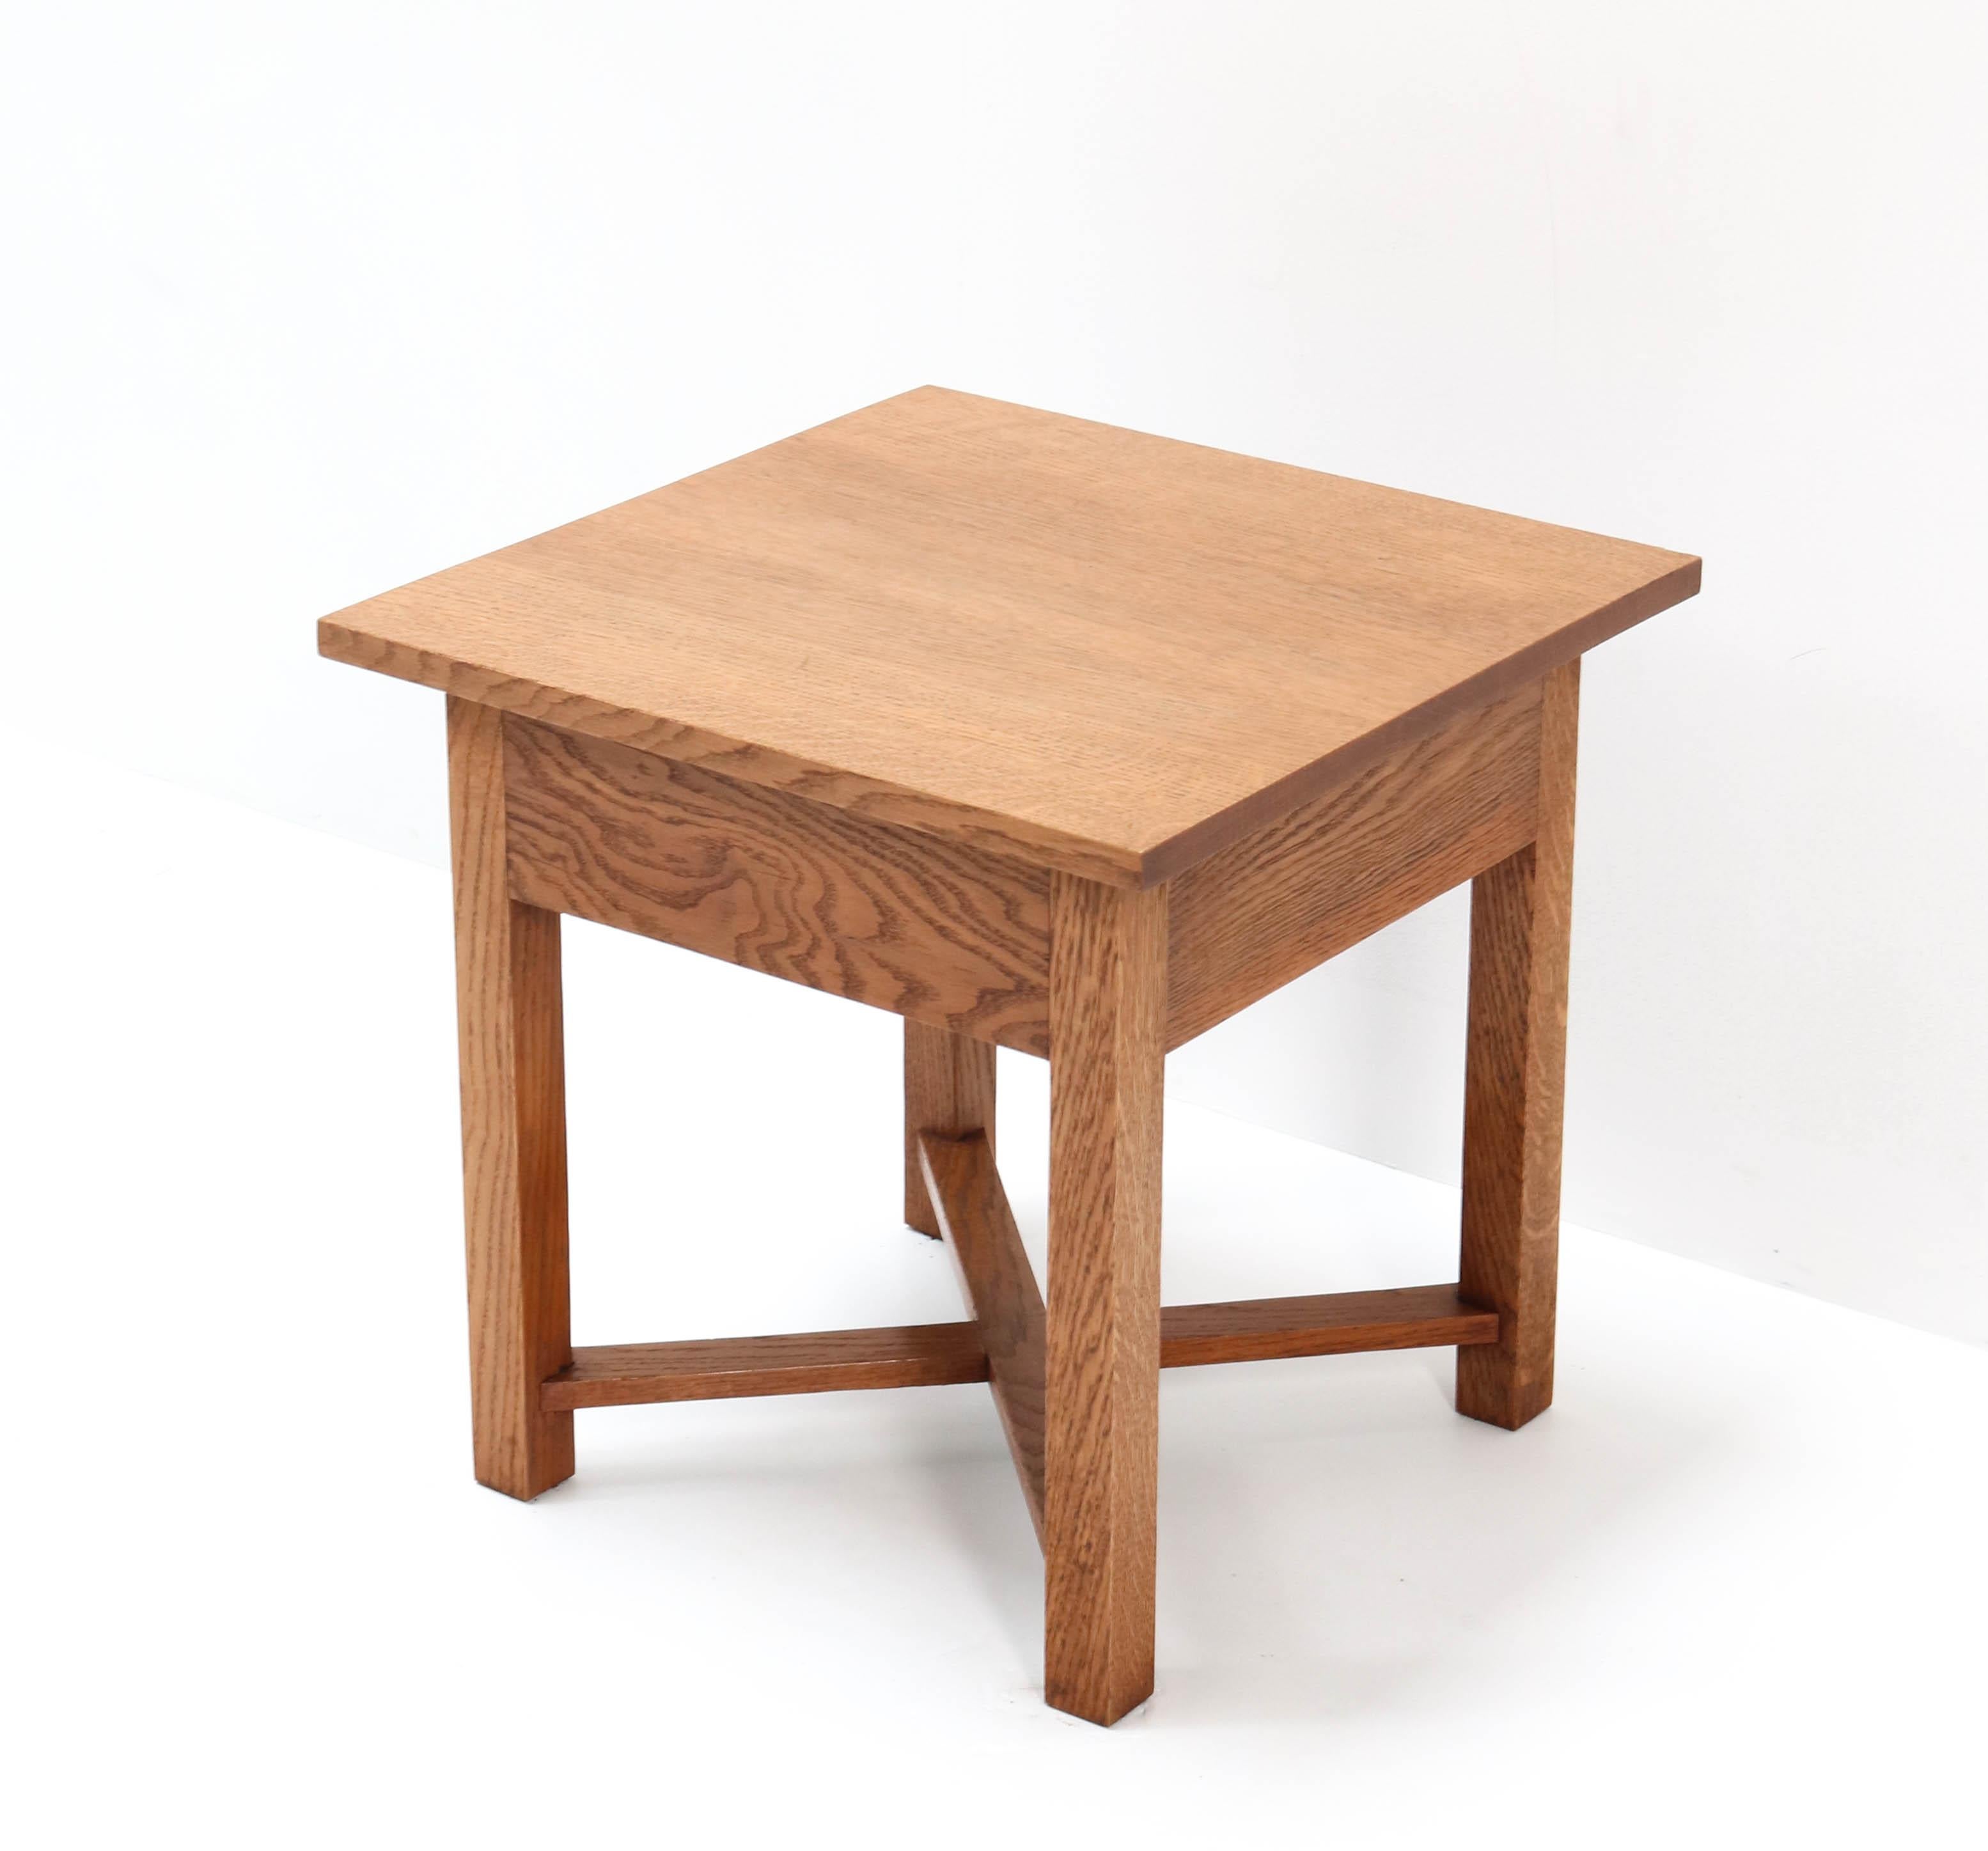 Solid Oak Art Deco Haagse School Side Table by Cor Alons, 1923 In Good Condition For Sale In Amsterdam, NL